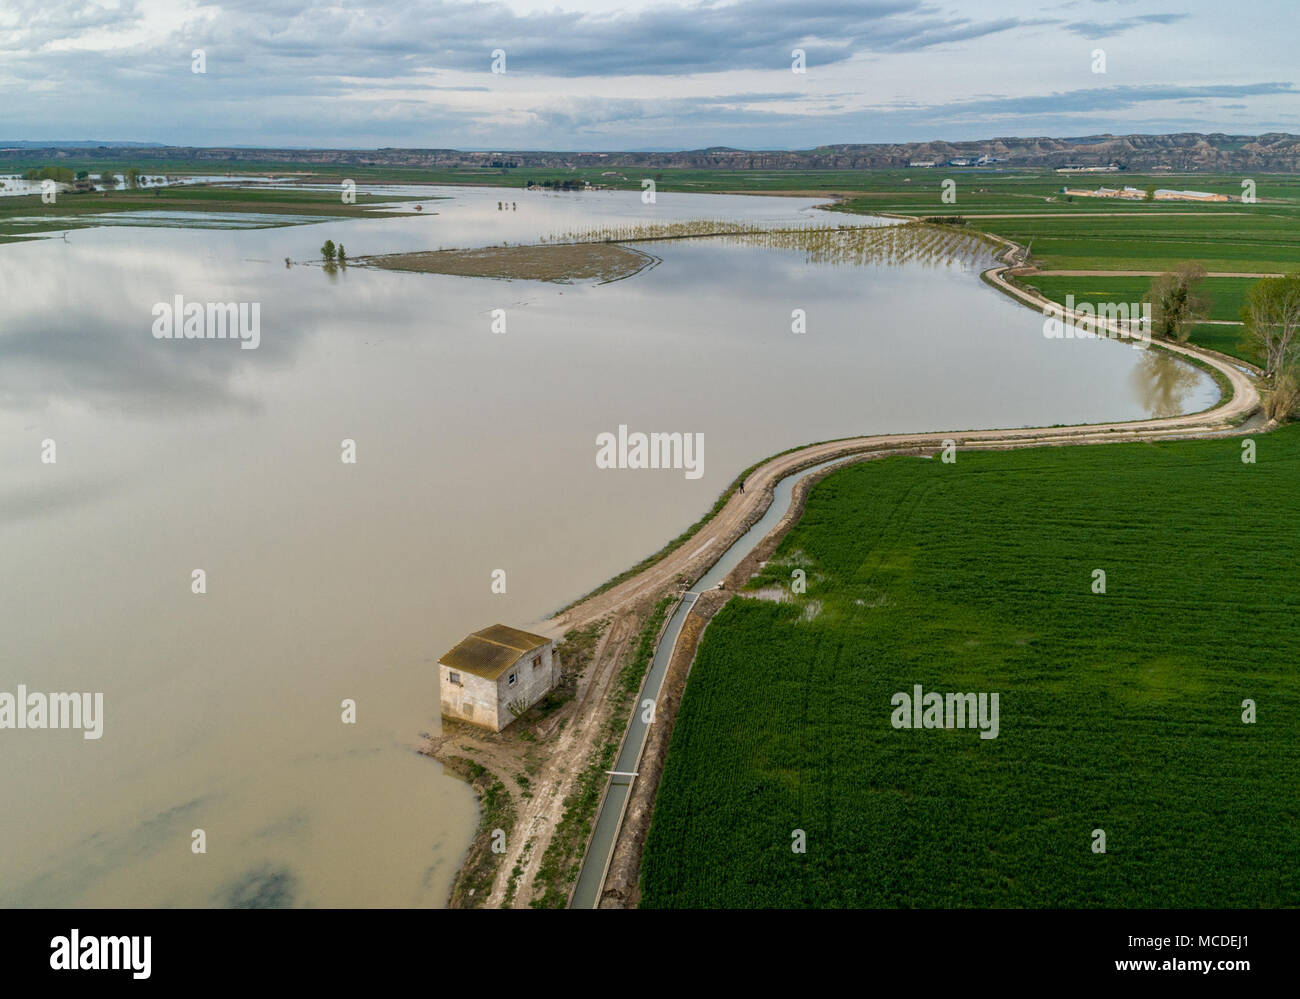 Zaragoza, Spain. 16th Apr, 2018. New rainfall alerts forecast again over Ebro Valley towns, as Pradilla de Ebro, Boquiñeni, Remolinos and others places close to the riverside. Furthermore mountain accumulated snow could be worse current situation next weeks up-level flooding. Environment, army and emergency forces remain in the area for the River Ebro. Credit: ChaviNandez/Alamy Live News Stock Photo